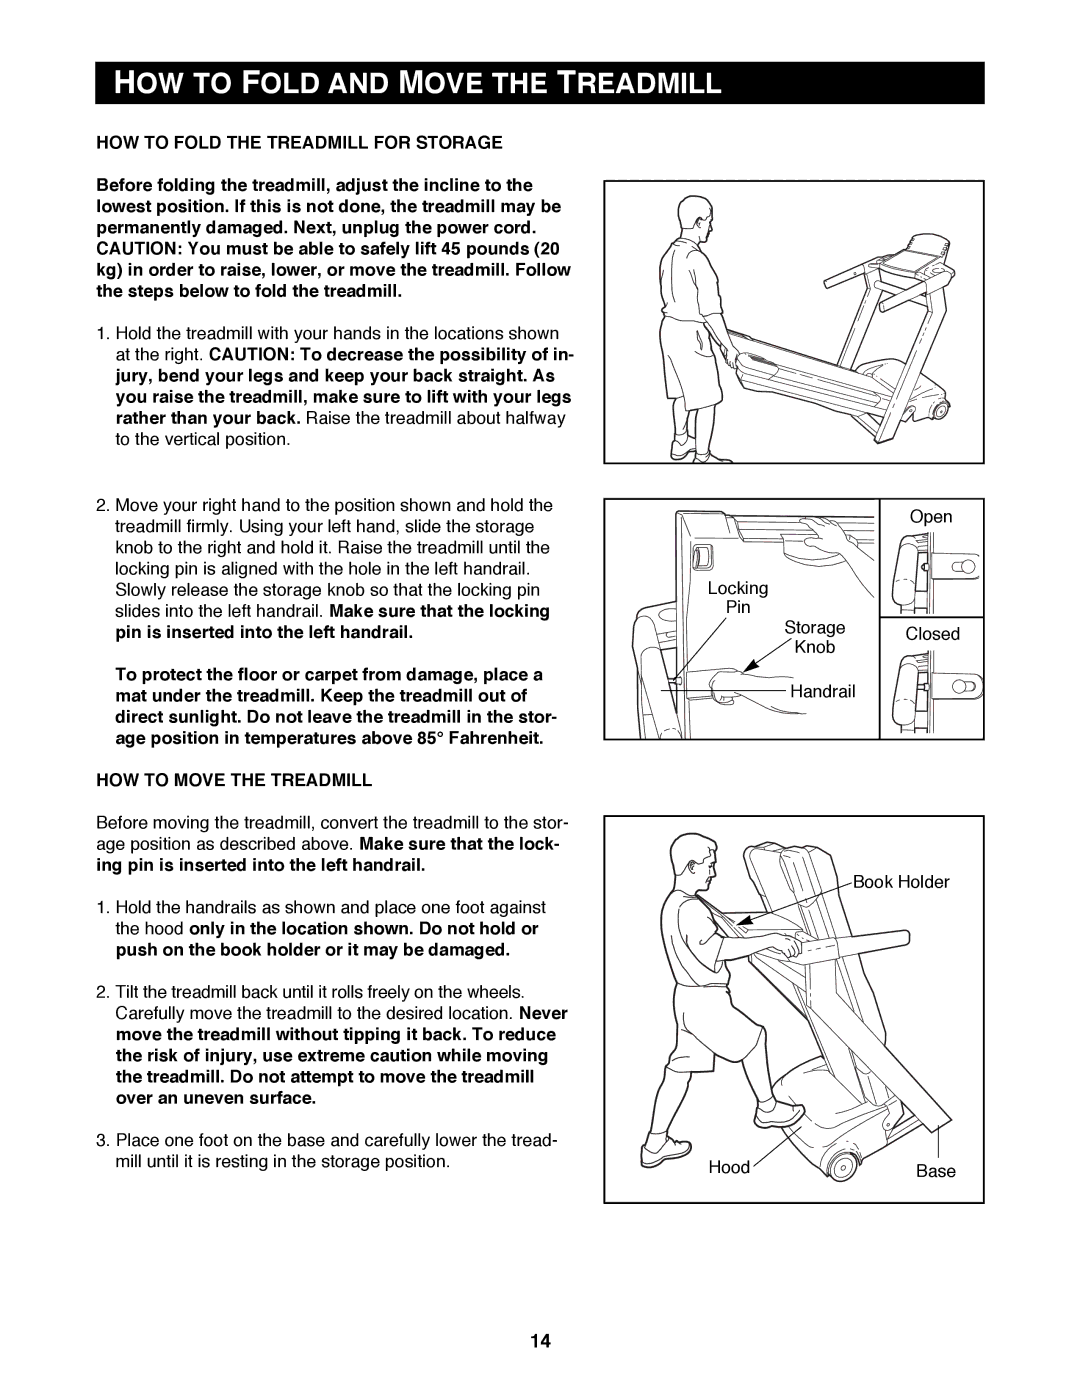 Reebok Fitness RBTL11980 manual HOW to Fold and Move the Treadmill, HOW to Fold the Treadmill for Storage 